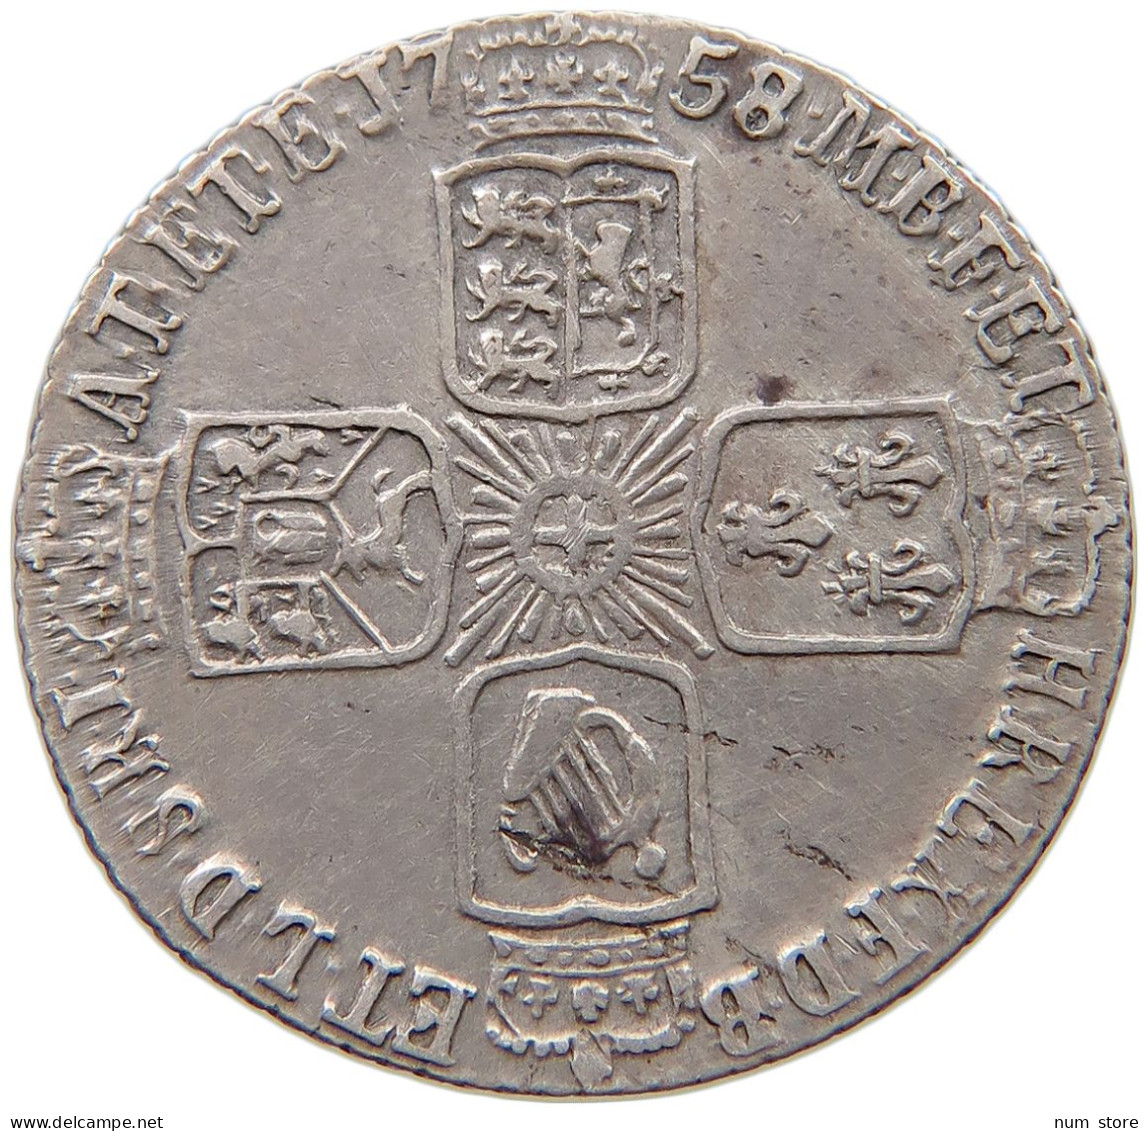 GREAT BRITAIN SIXPENCE 1758 George II. 1727-1760. #t107 0389 - G. 6 Pence